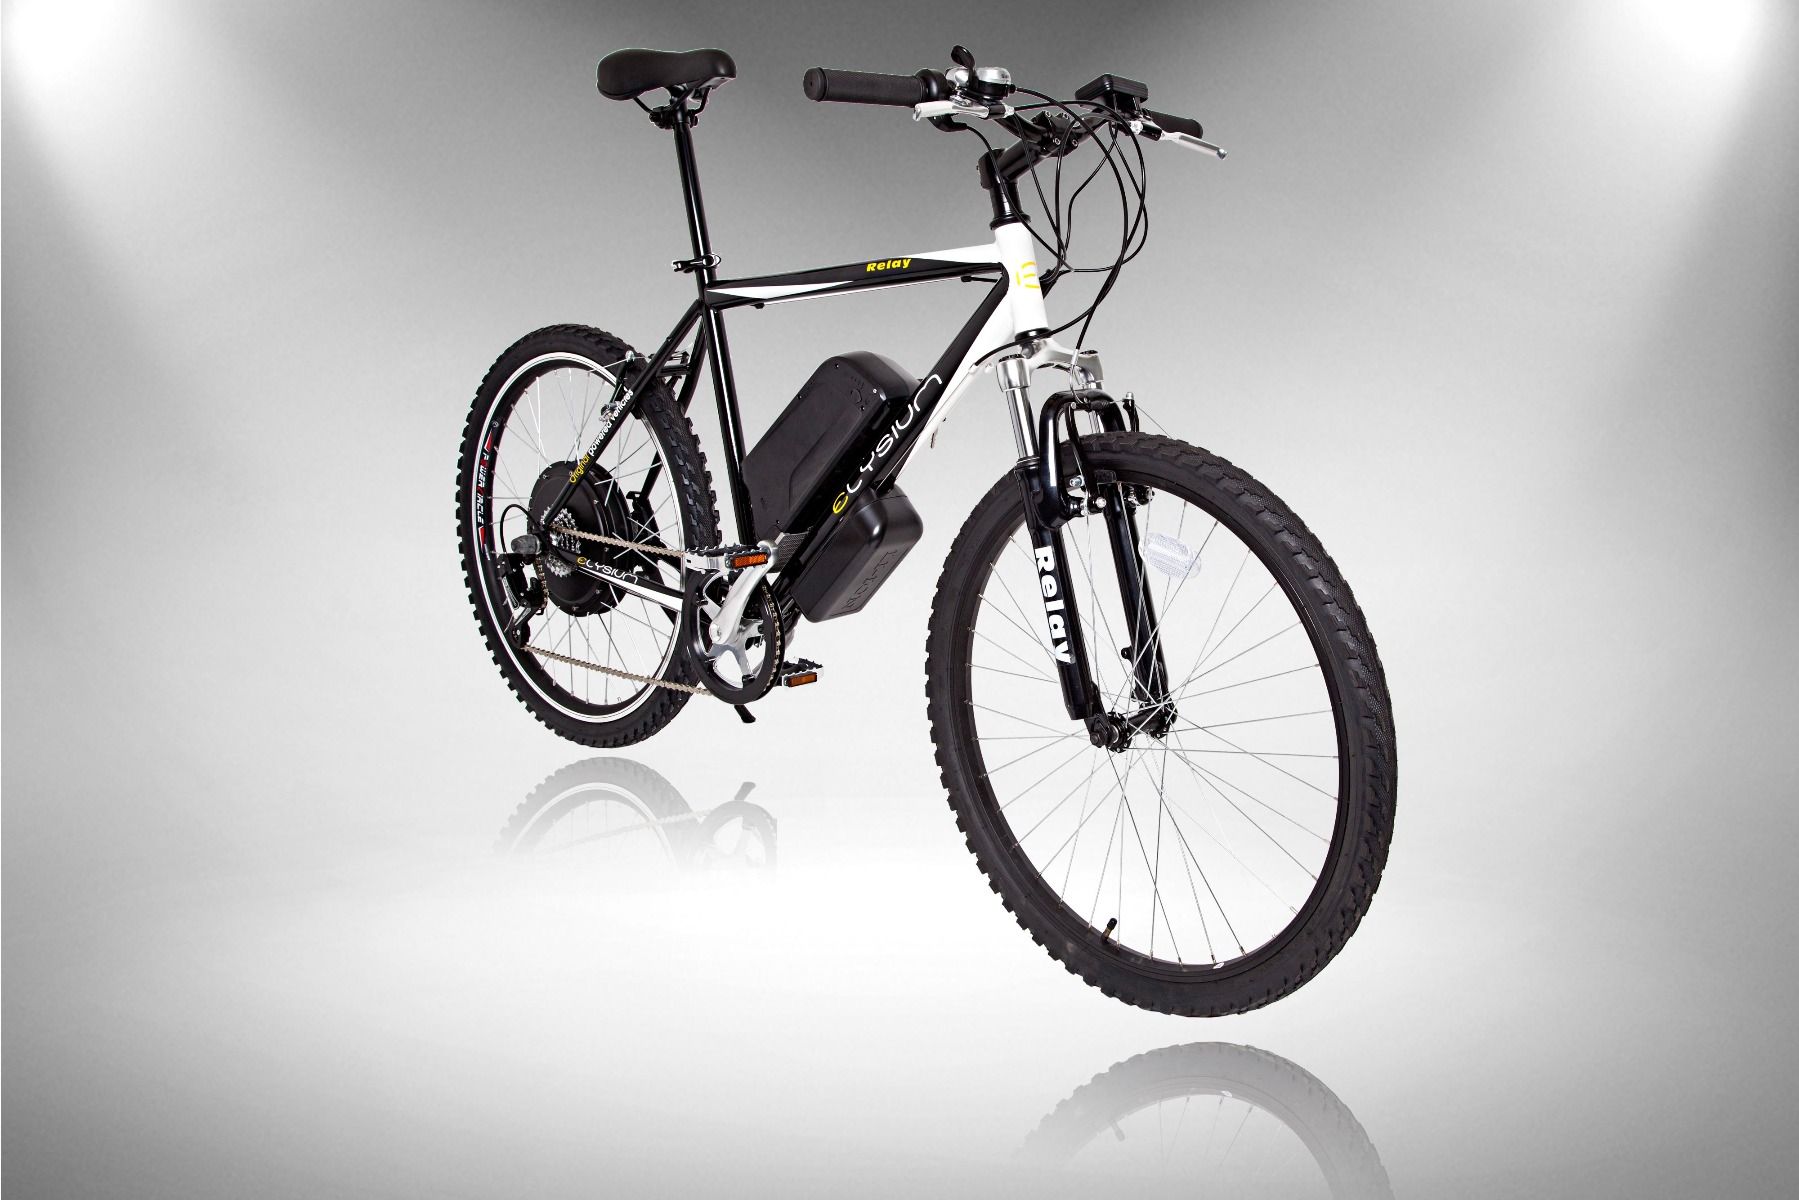  Revolutionize your Ride with Cyclotricity's Elysium Relay 500W Electric Bike